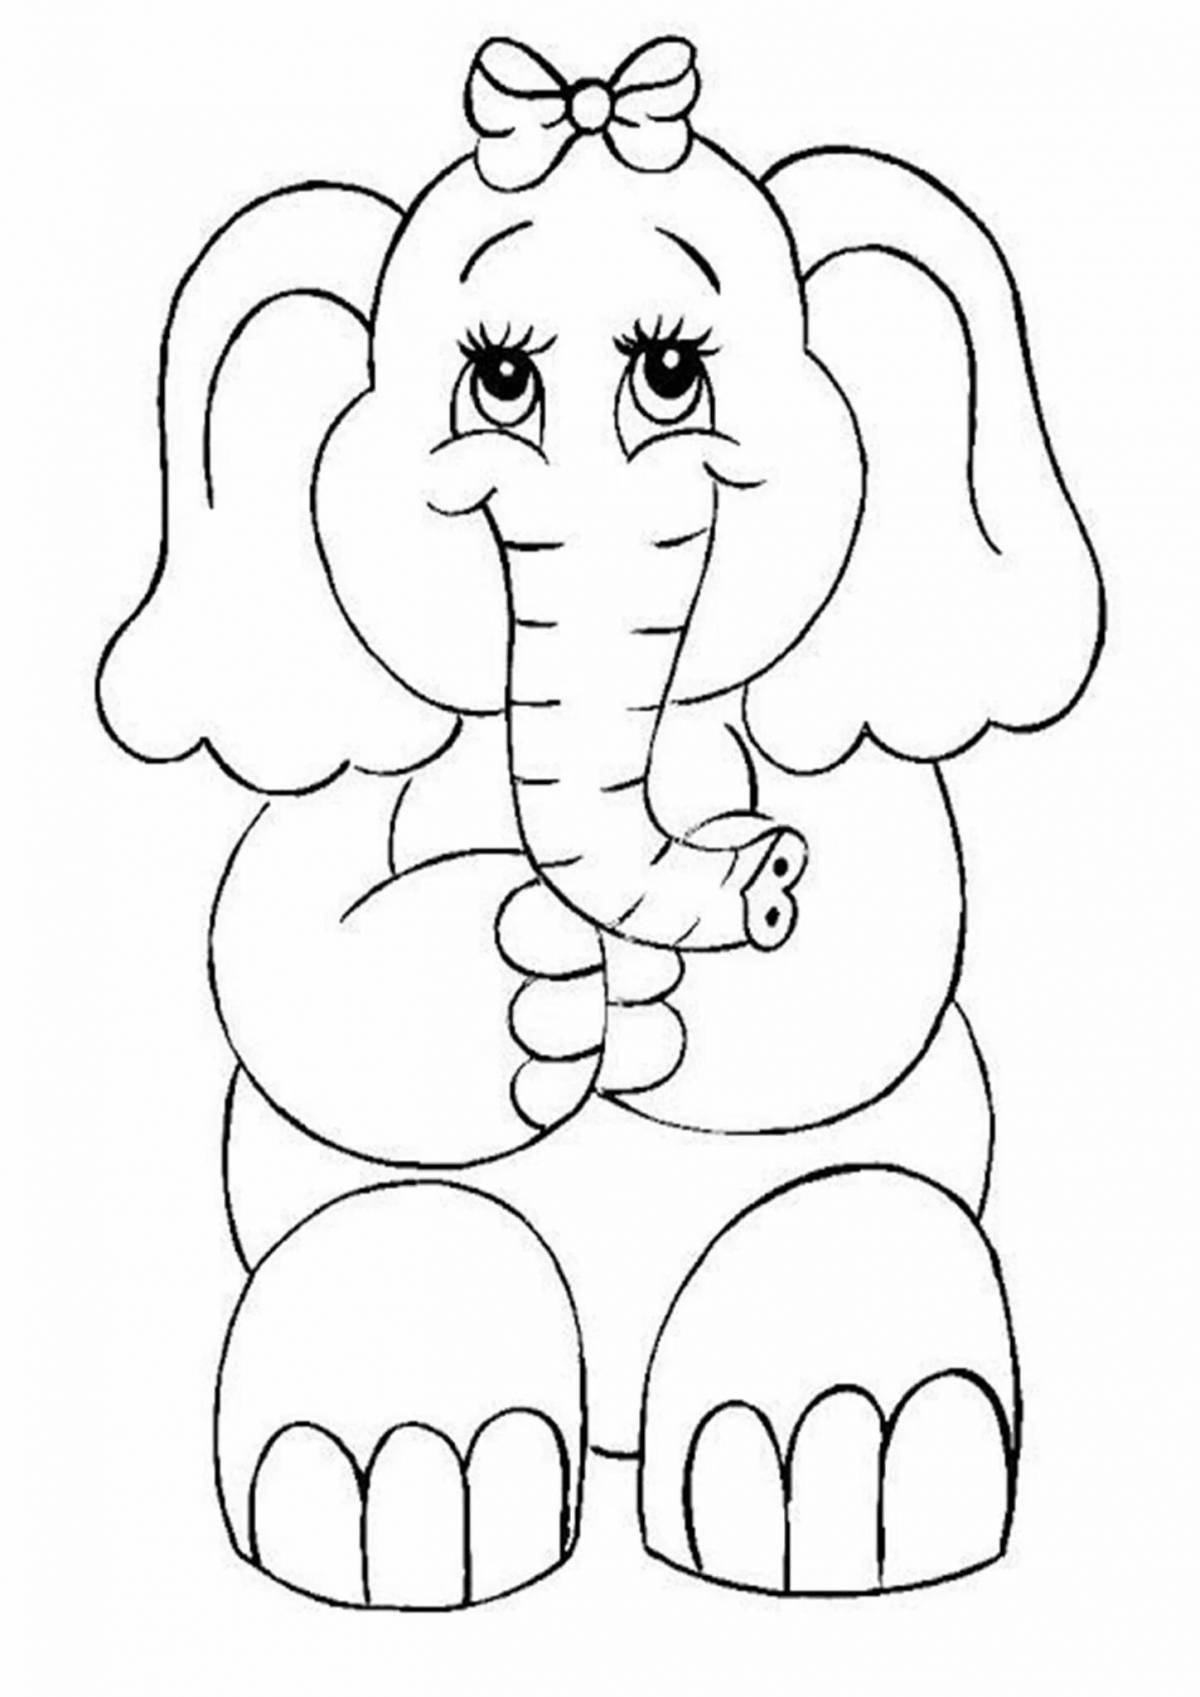 Adorable elephant coloring book for 3-4 year olds